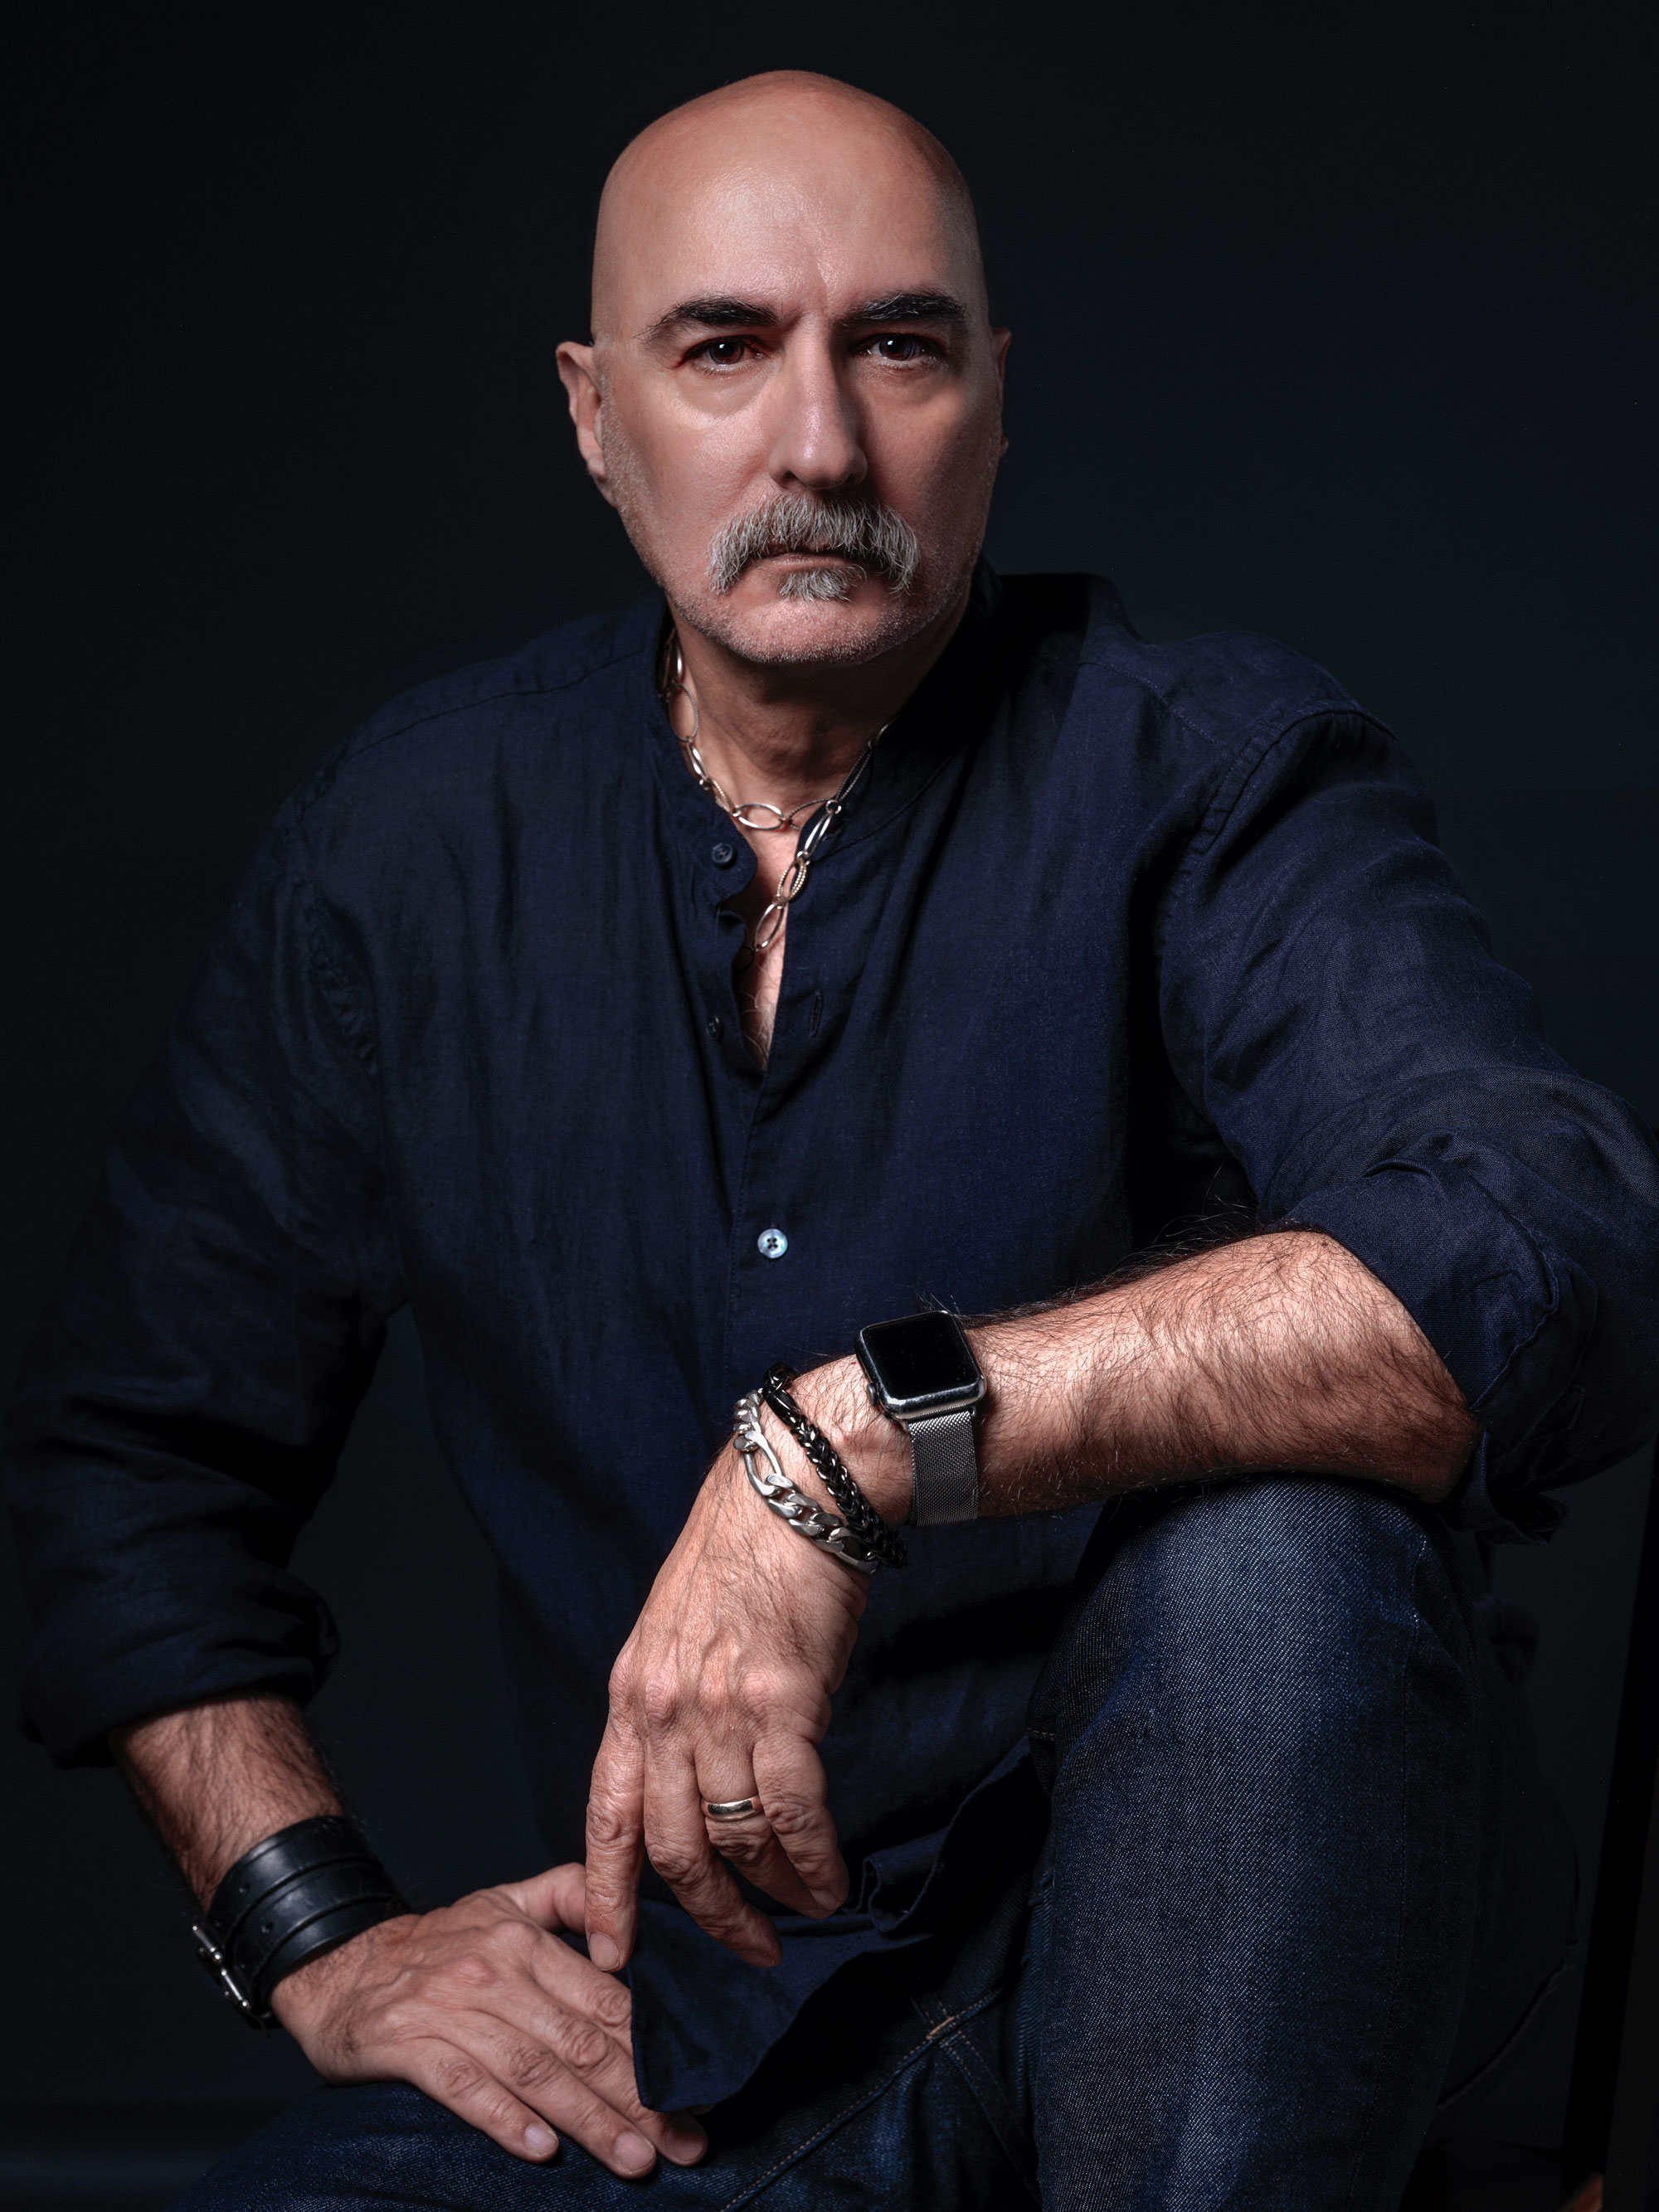 Photo of photographer Ron Amato in a dark blue shirt, dark blue jeans, with silver and leather wristbands and necklaces, seated with a black background